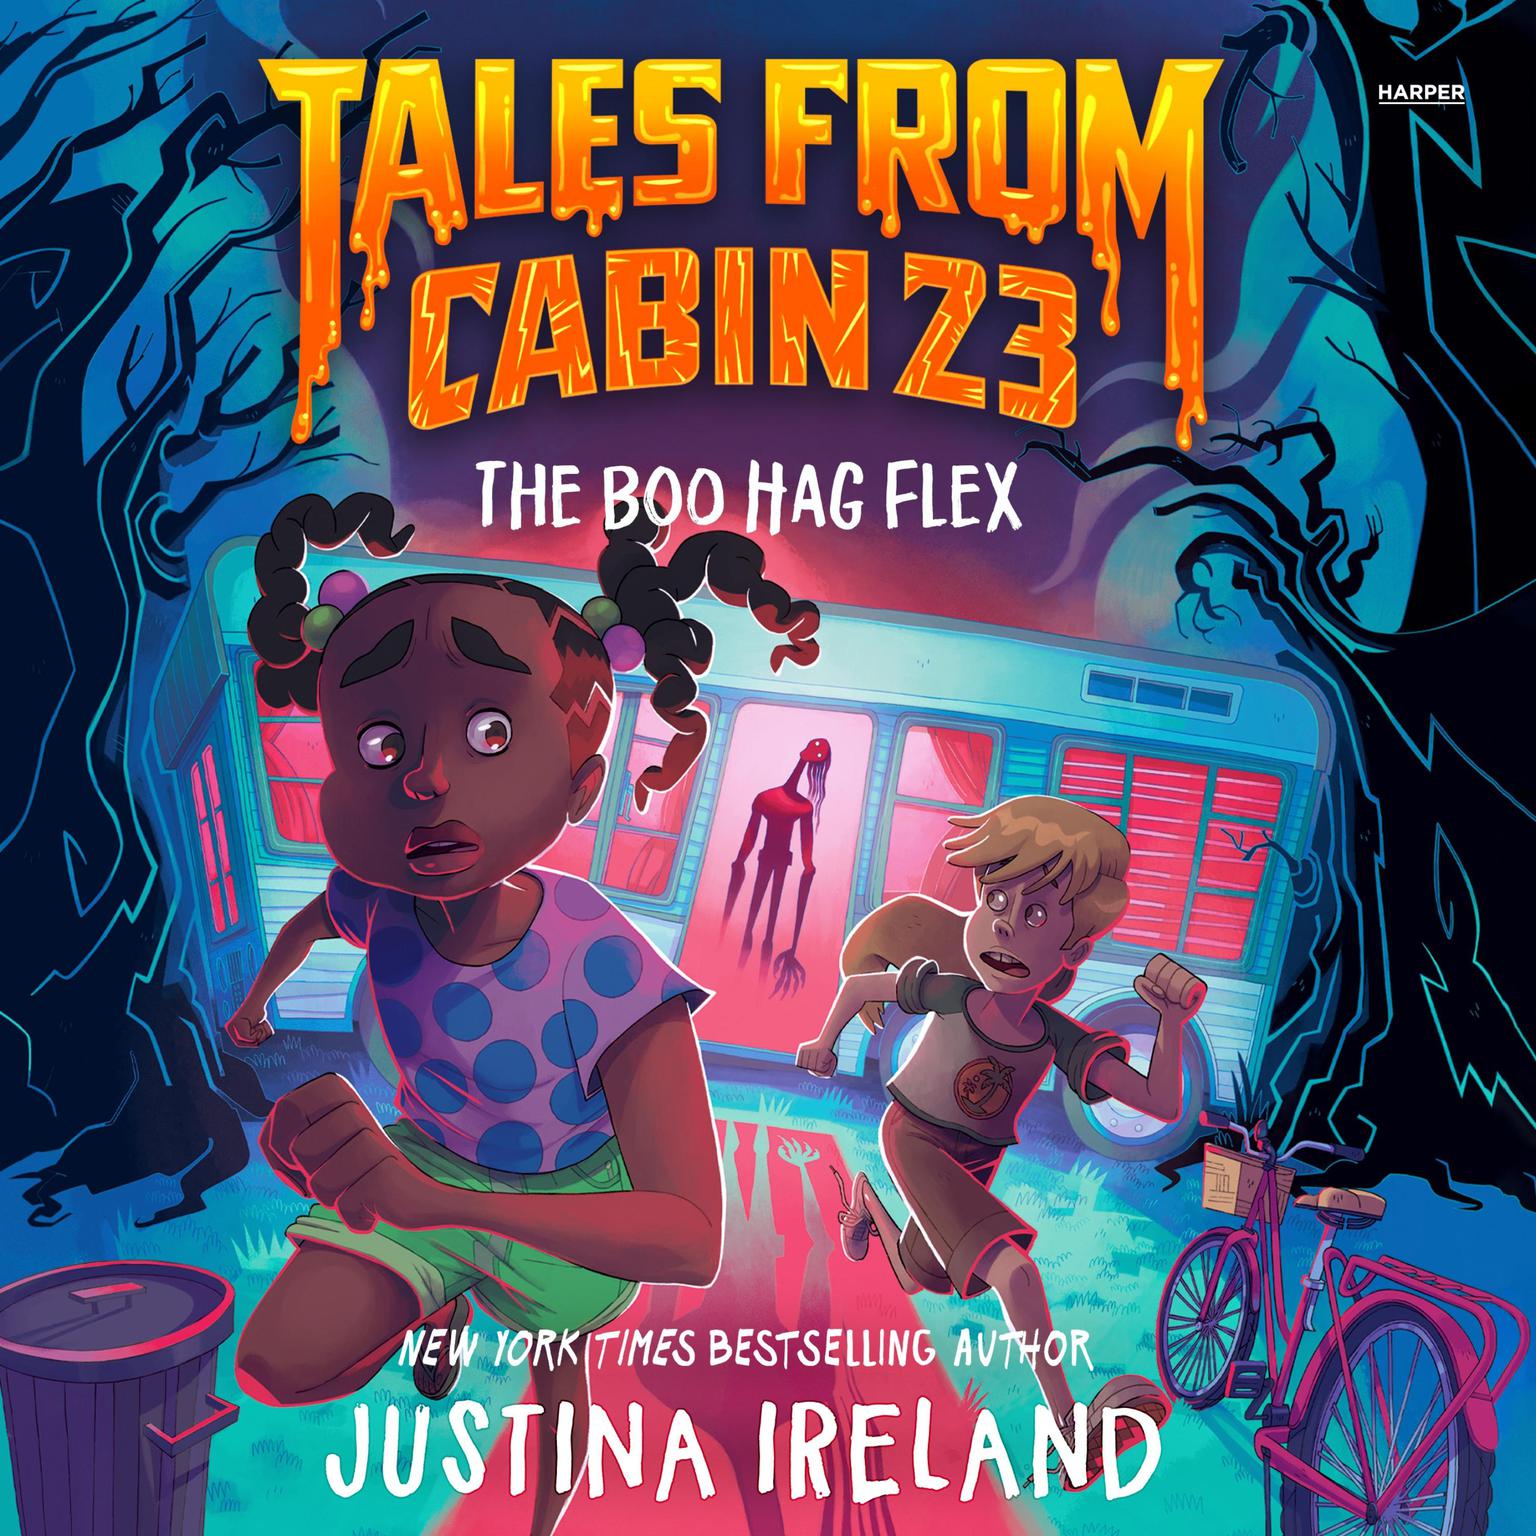 Tales from Cabin 23: The Boo Hag Flex Audiobook, by Justina Ireland